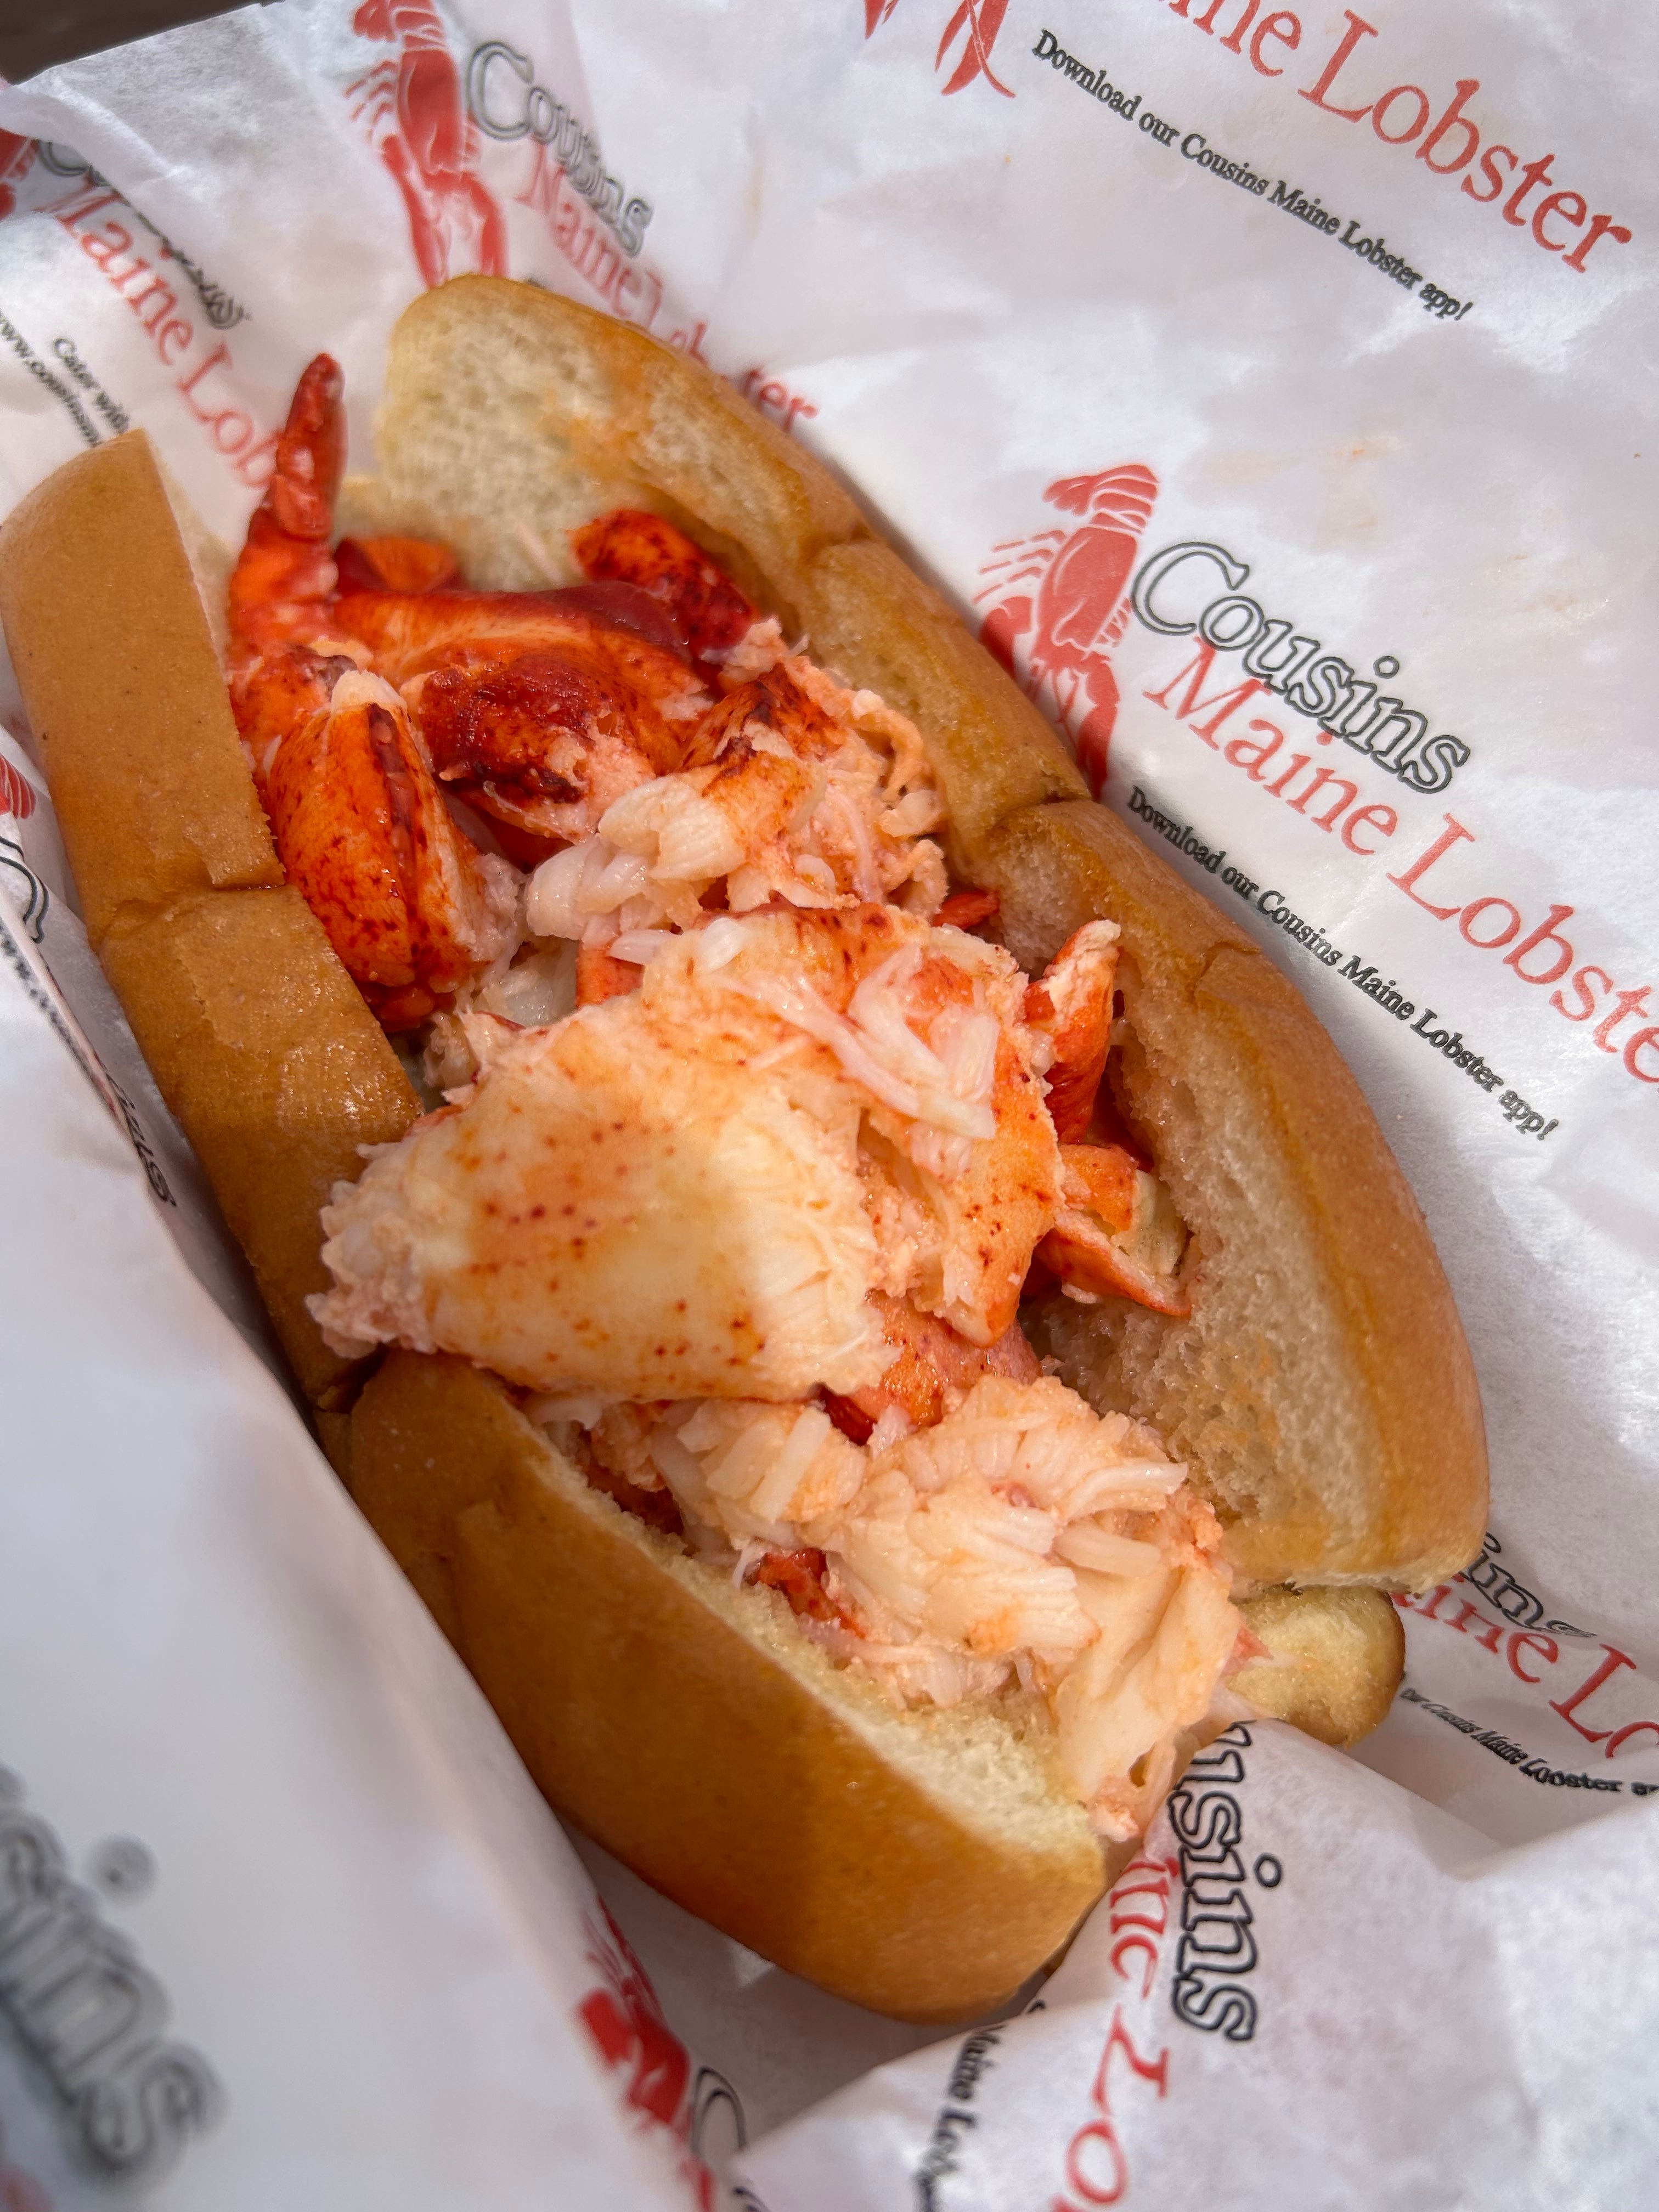 Cousins Maine Lobster food truck offers sweet experience | Local Flavor on Wheels